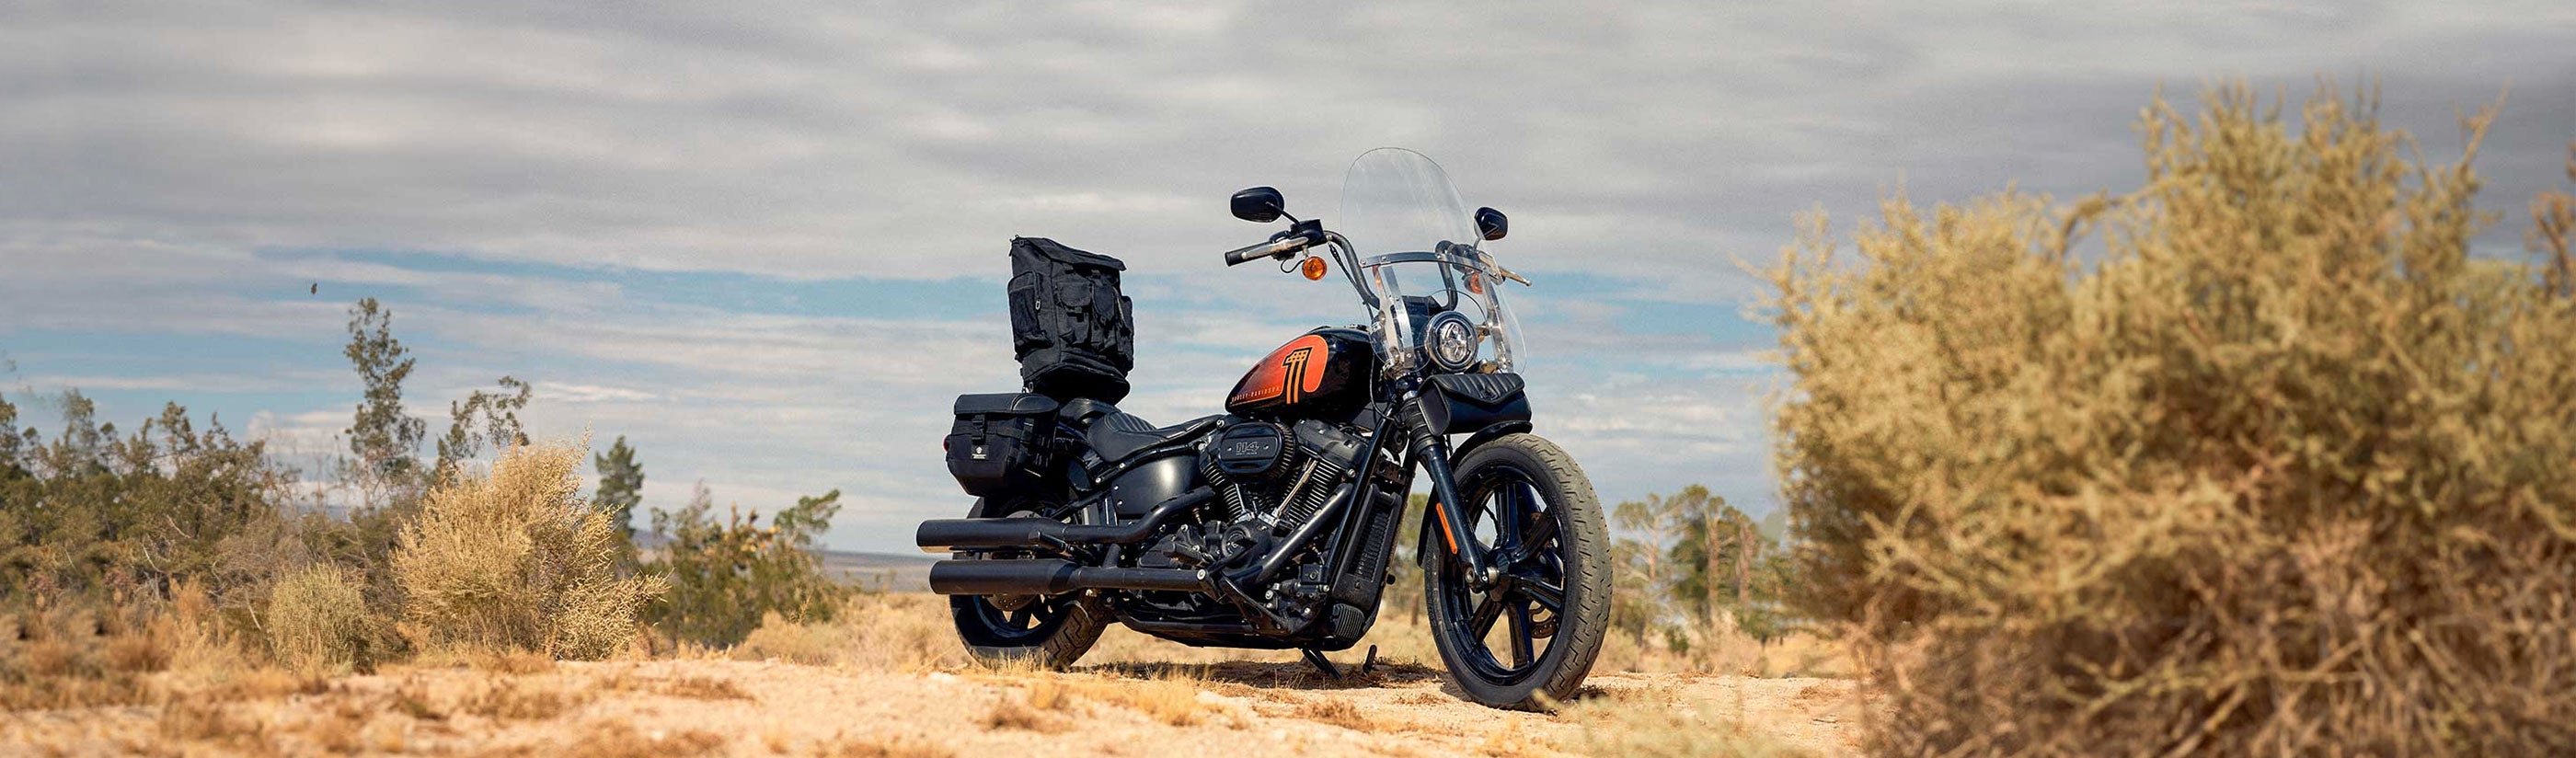 Harley Softail Street Bob FXBB All Motorcycle Luggage Bags, Parts & Accessories By Bike